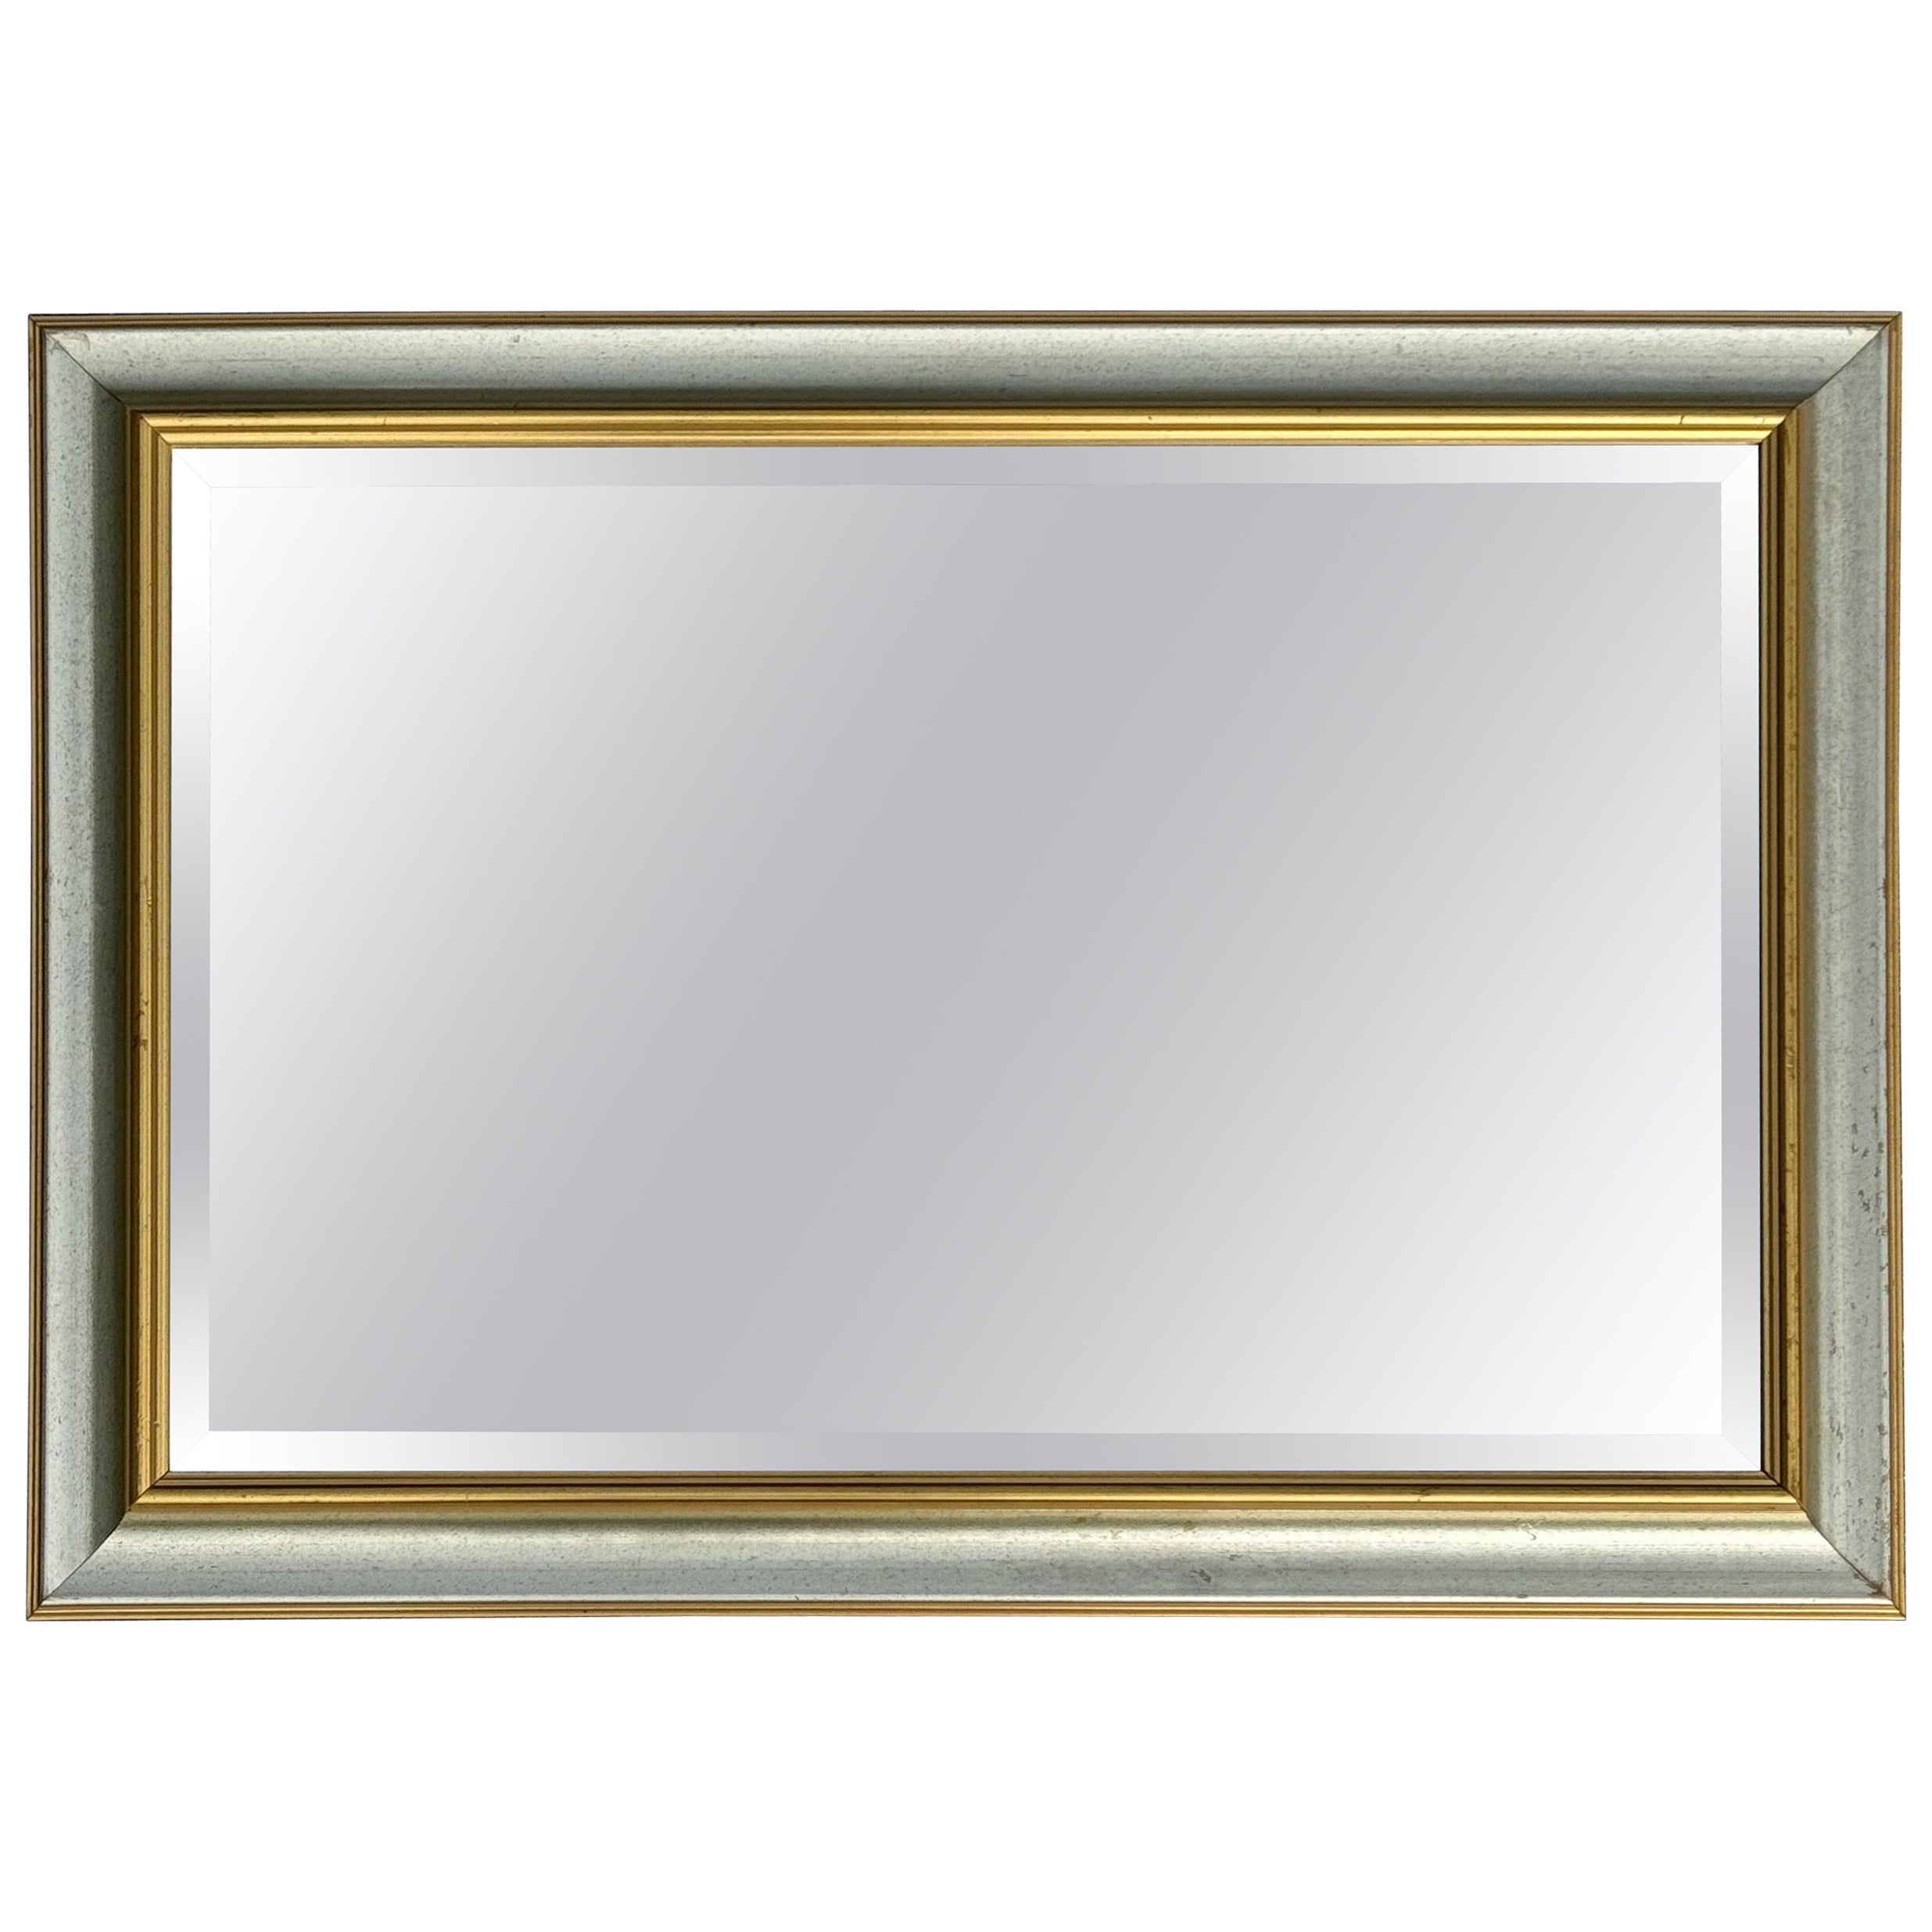 LOVELY SILVER & GOLD BEVELLED MiRROR